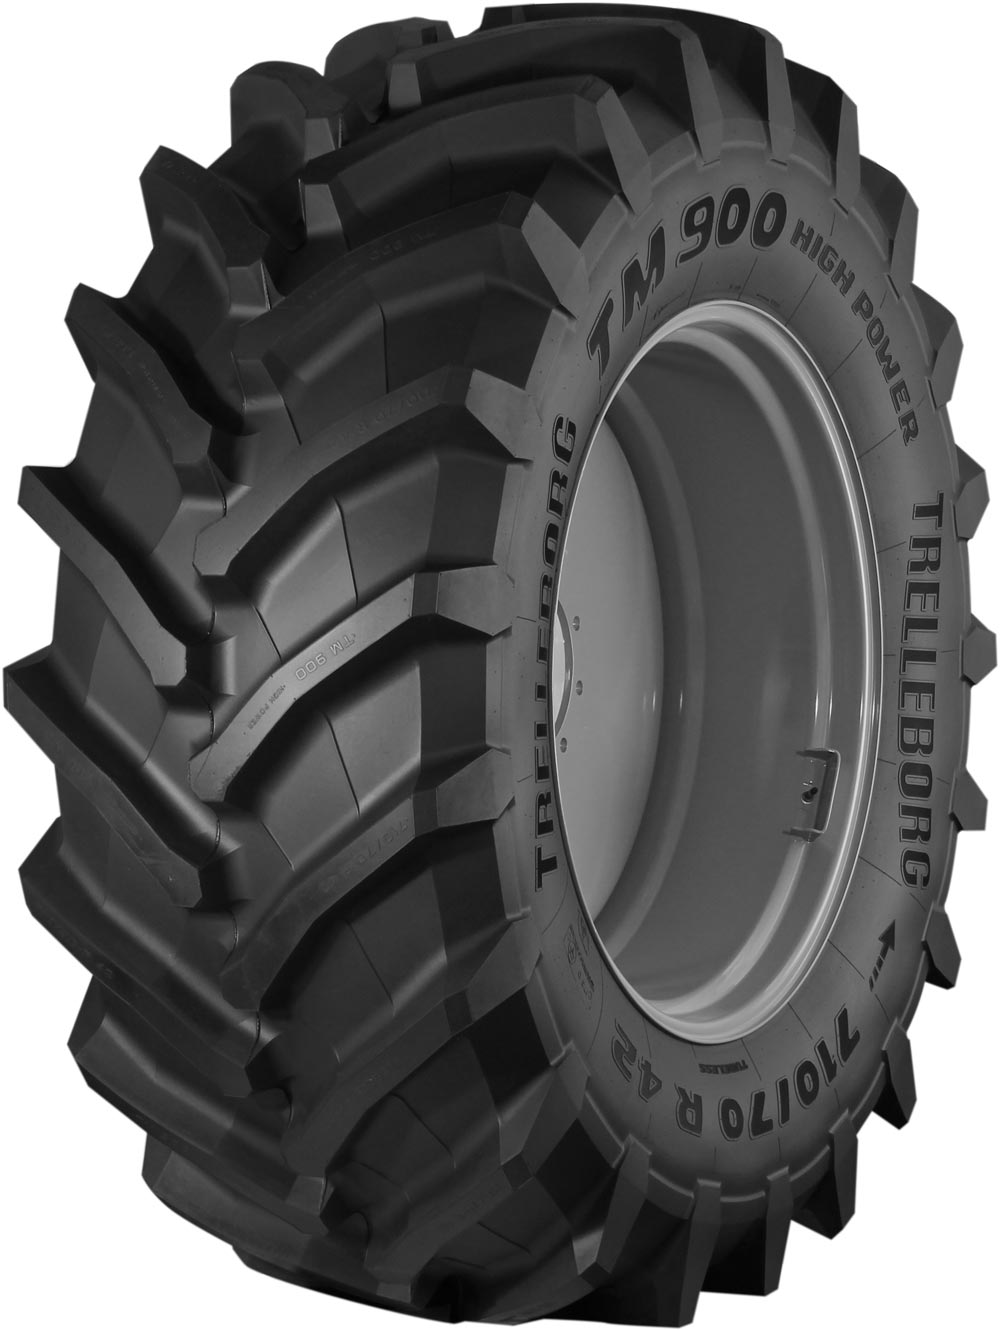 product_type-industrial_tires Trelleborg TM 900 HP TL 710/70 R42 179A